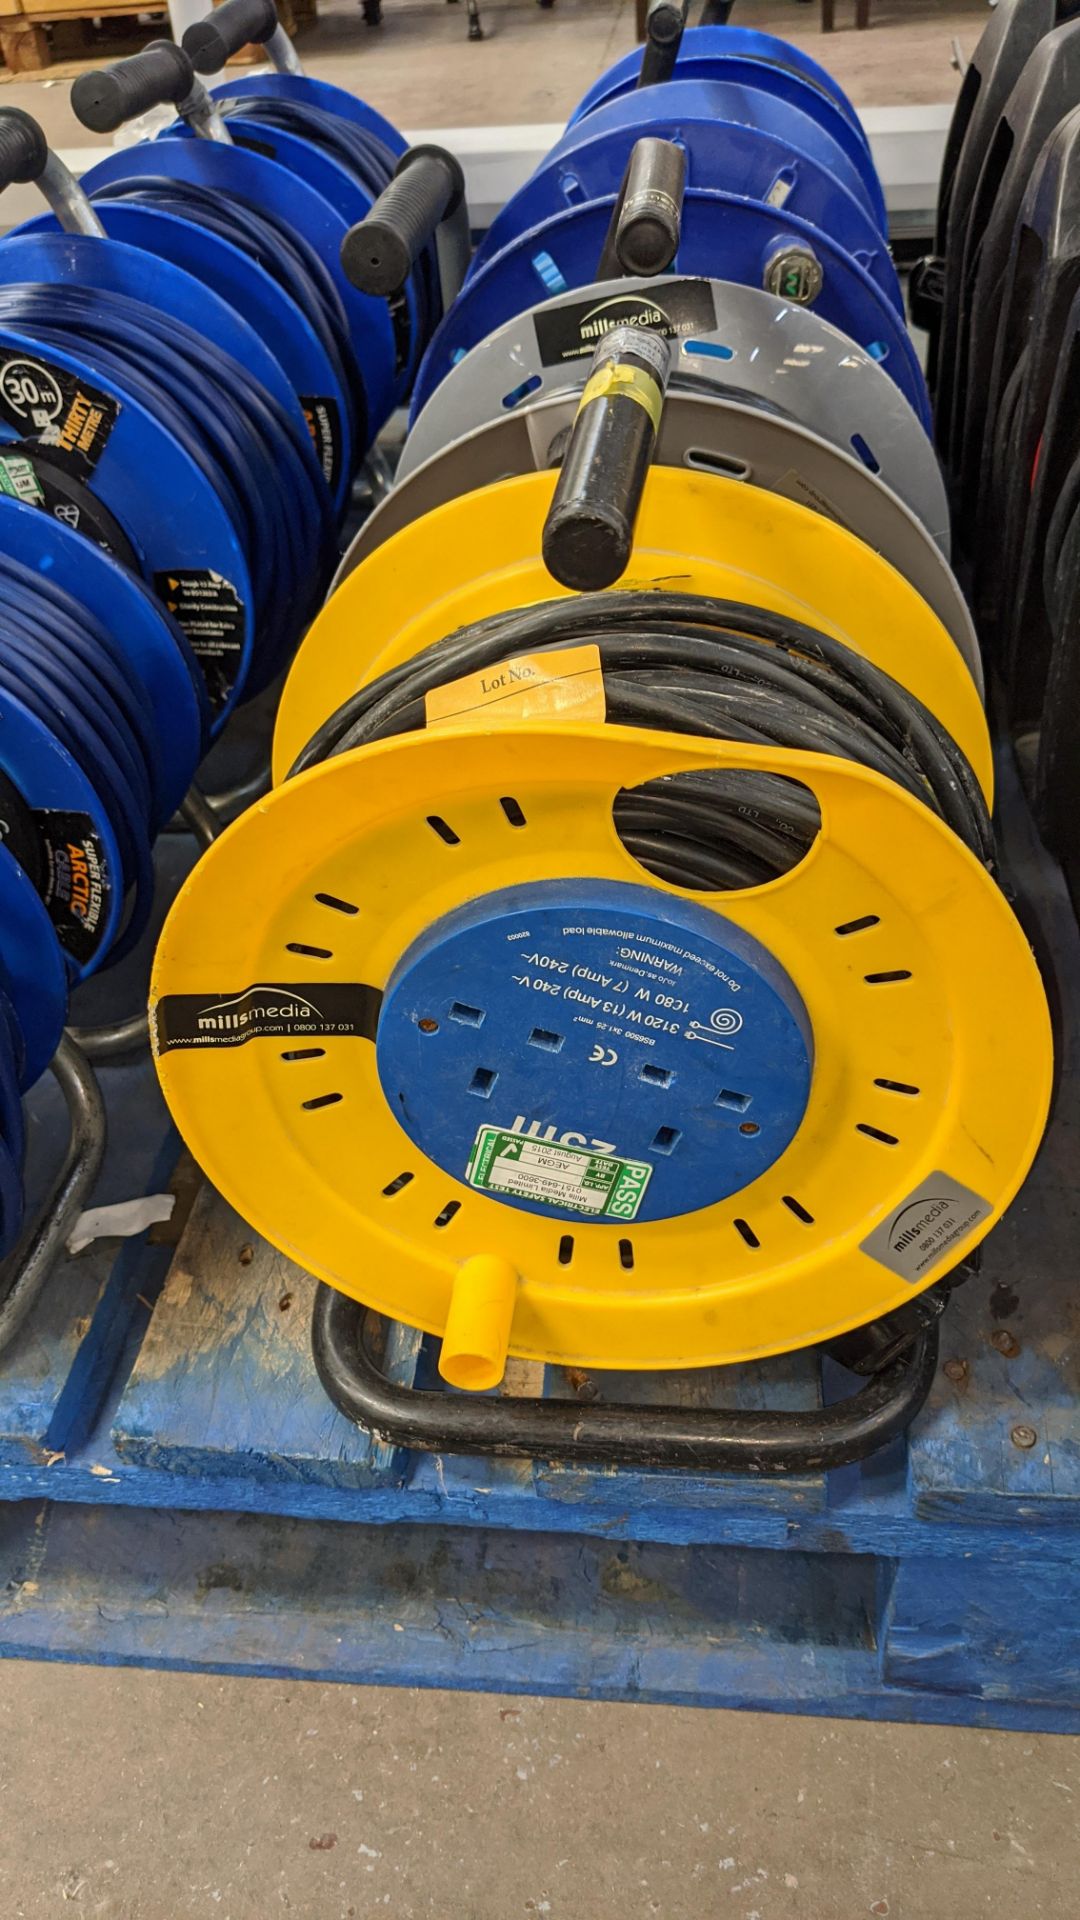 5 off 230/240V multi socket cable extension reels Lots 51 - 480 comprise the total assets of Mills - Image 2 of 5